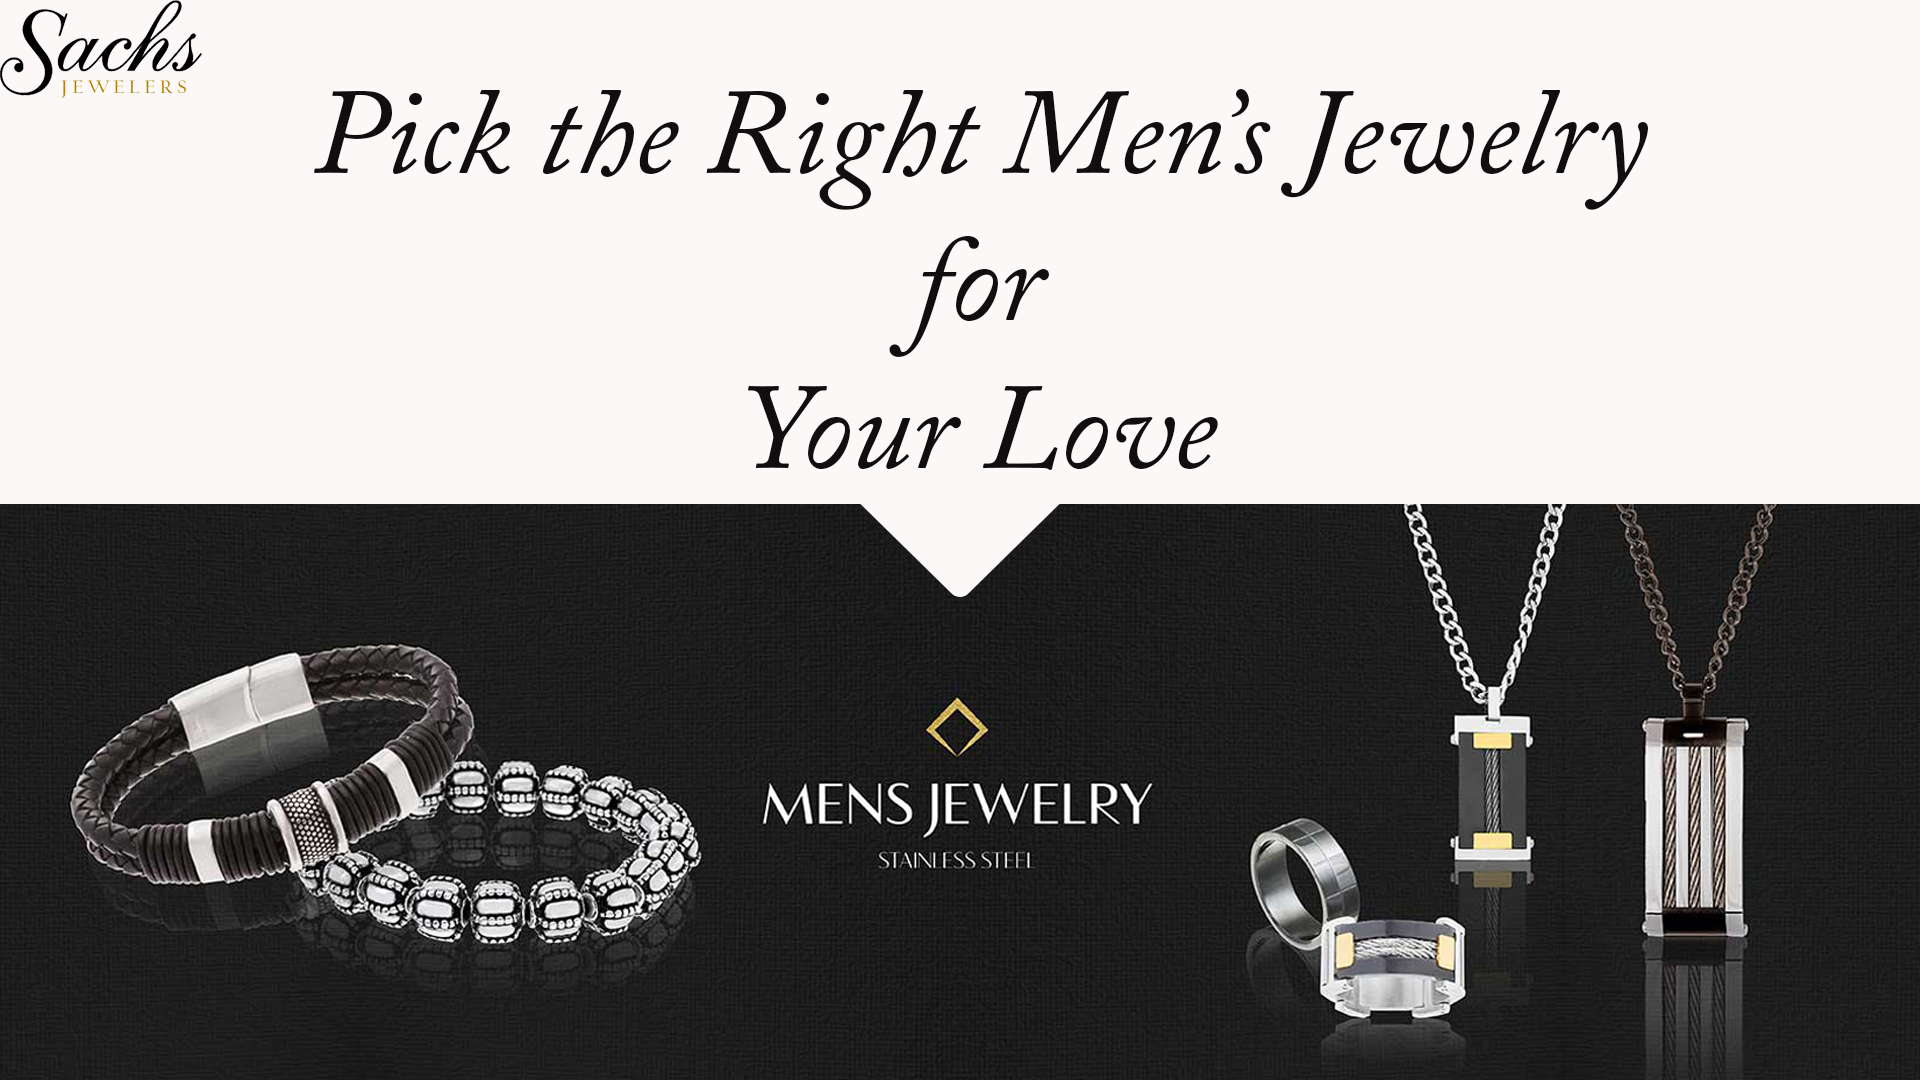 Pick the Right Men’s Jewelry for Your Love